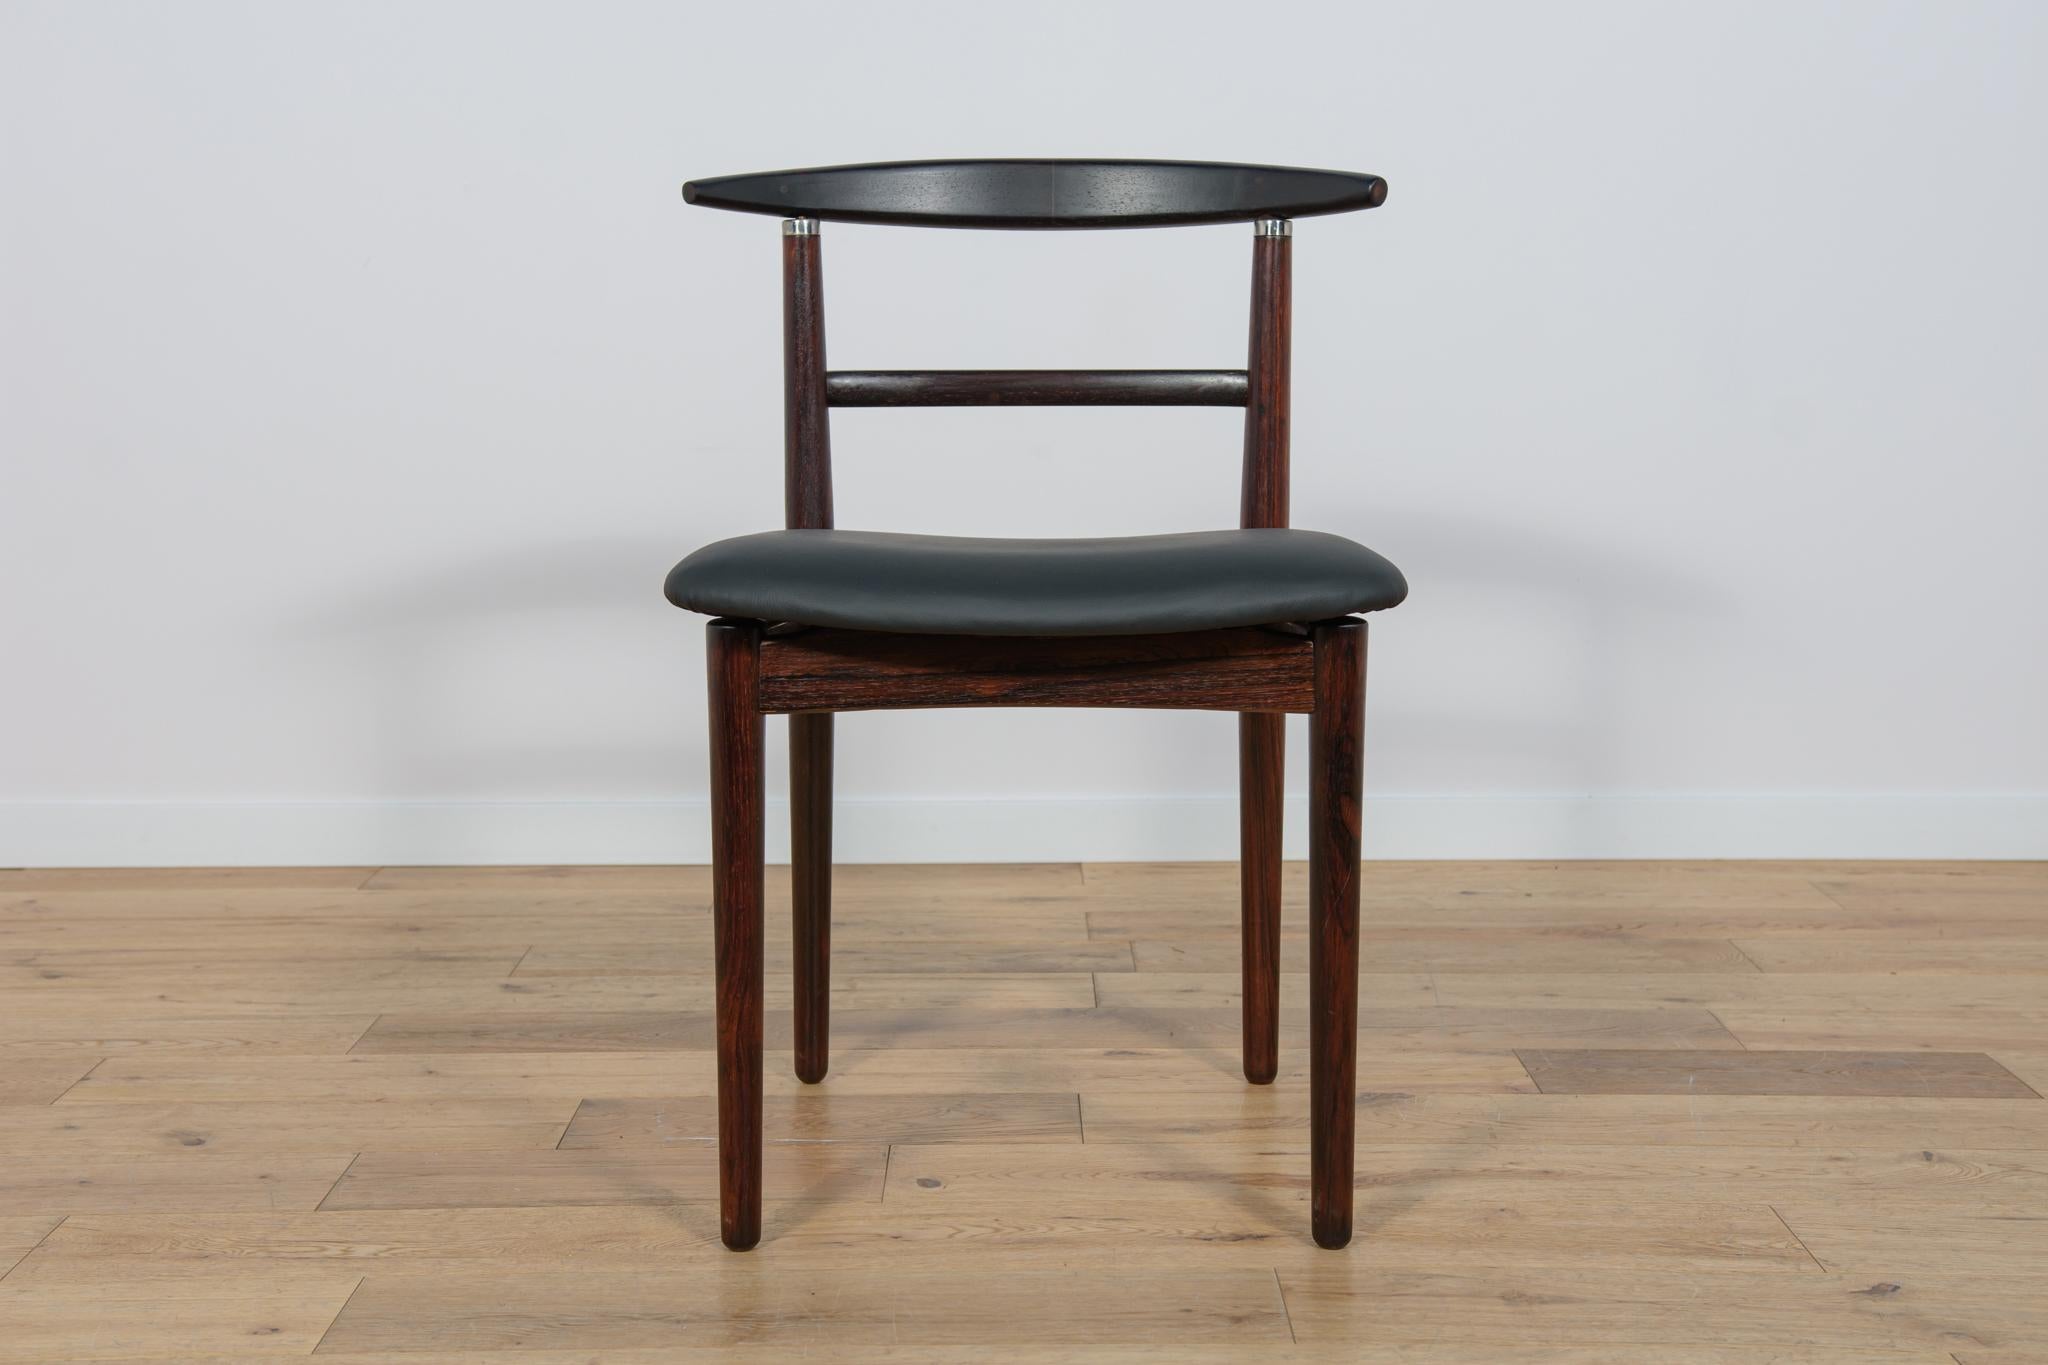 Mid-20th Century Rosewood Dining Chairs by Helge Sibast & Børge Rammerskov, Denmark, 1960s. For Sale